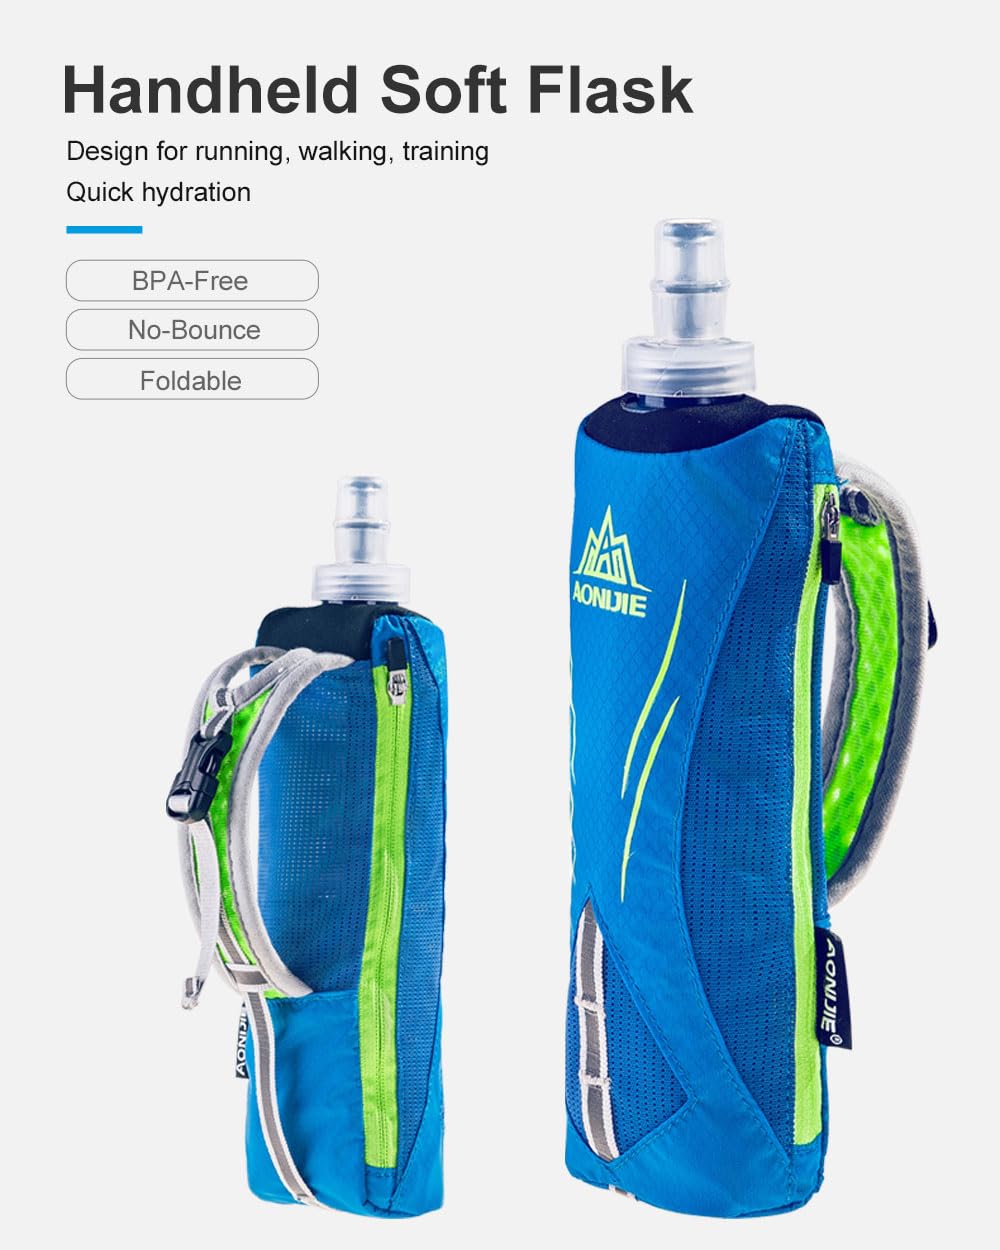 AONIJIE Running Water Bottle Hand Held for Runners, Fit 6.5 Inches Phone, Collapsible 17oz/ 500ml Soft Flask, Adjustable Strap Handheld for Walking, Hiking